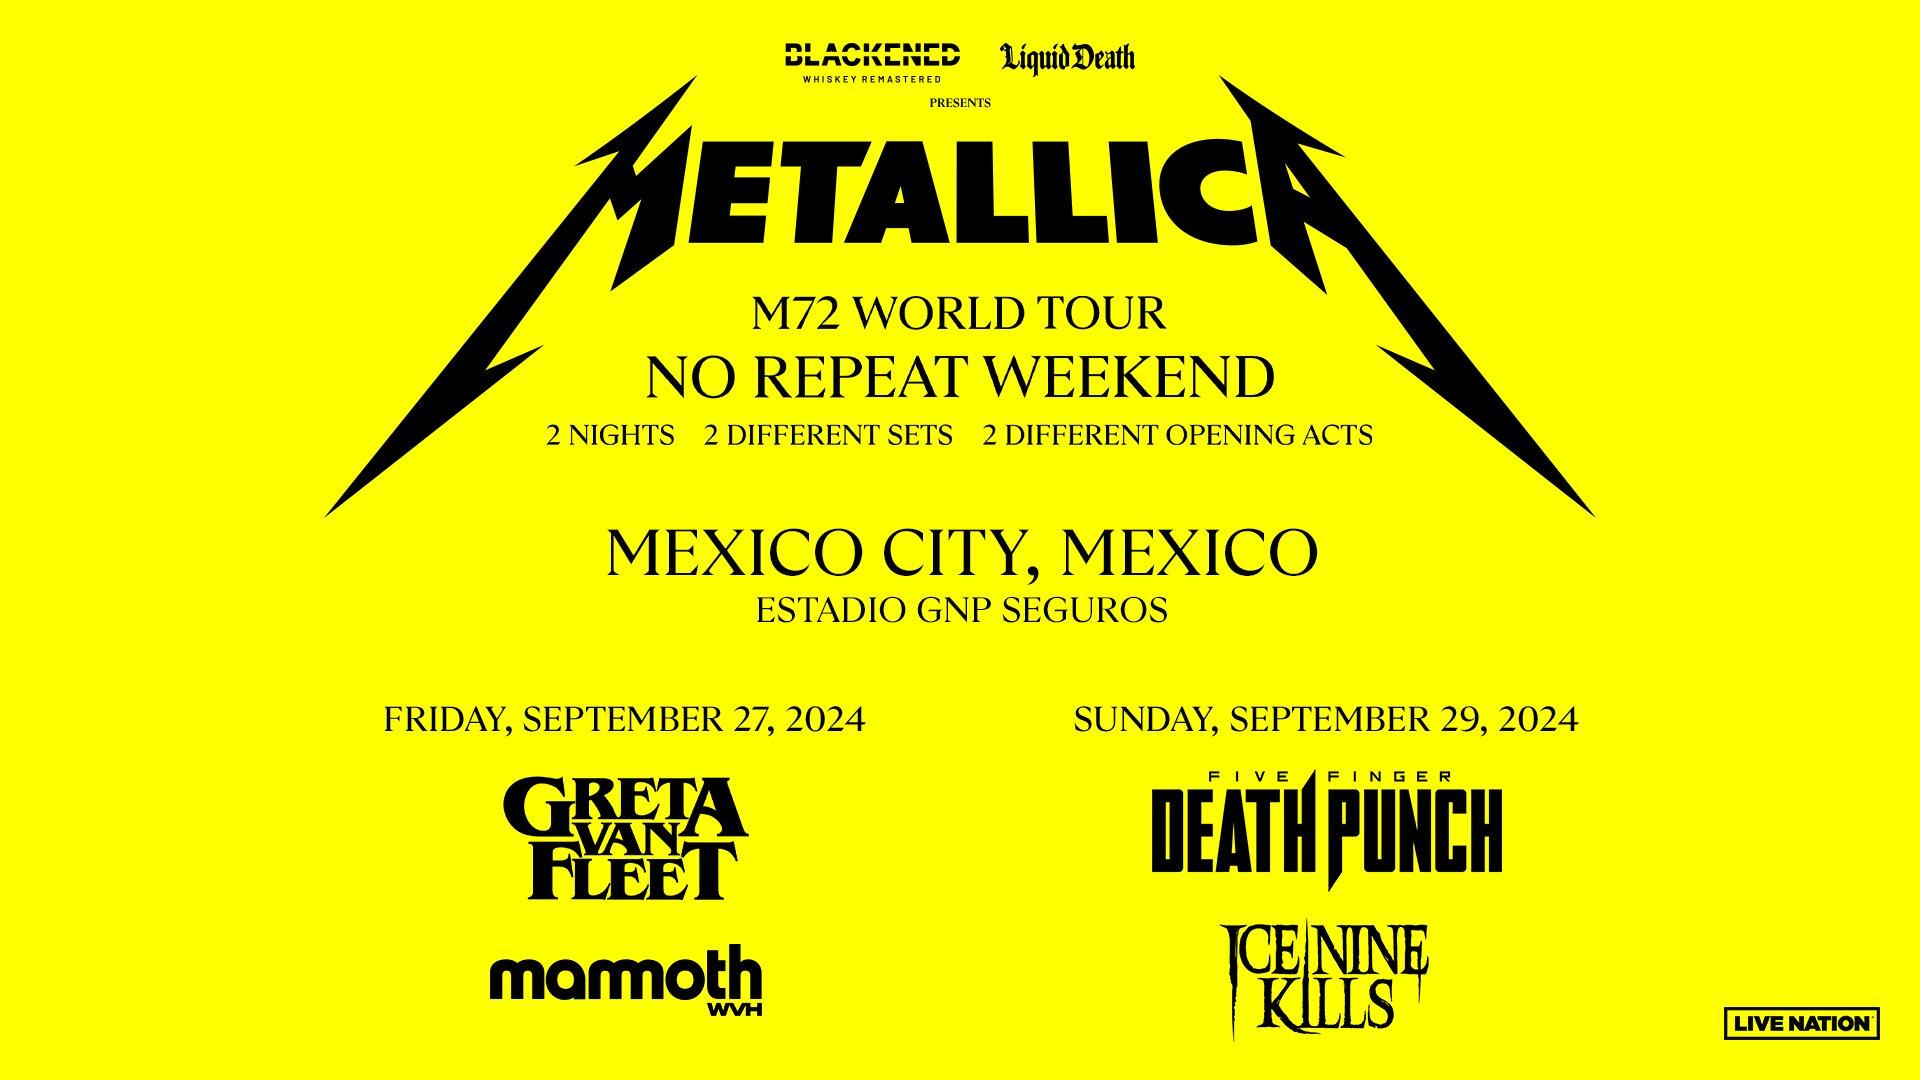 Metallica at Foro Sol in Mexico City, Mexico on September 27, 2024 on